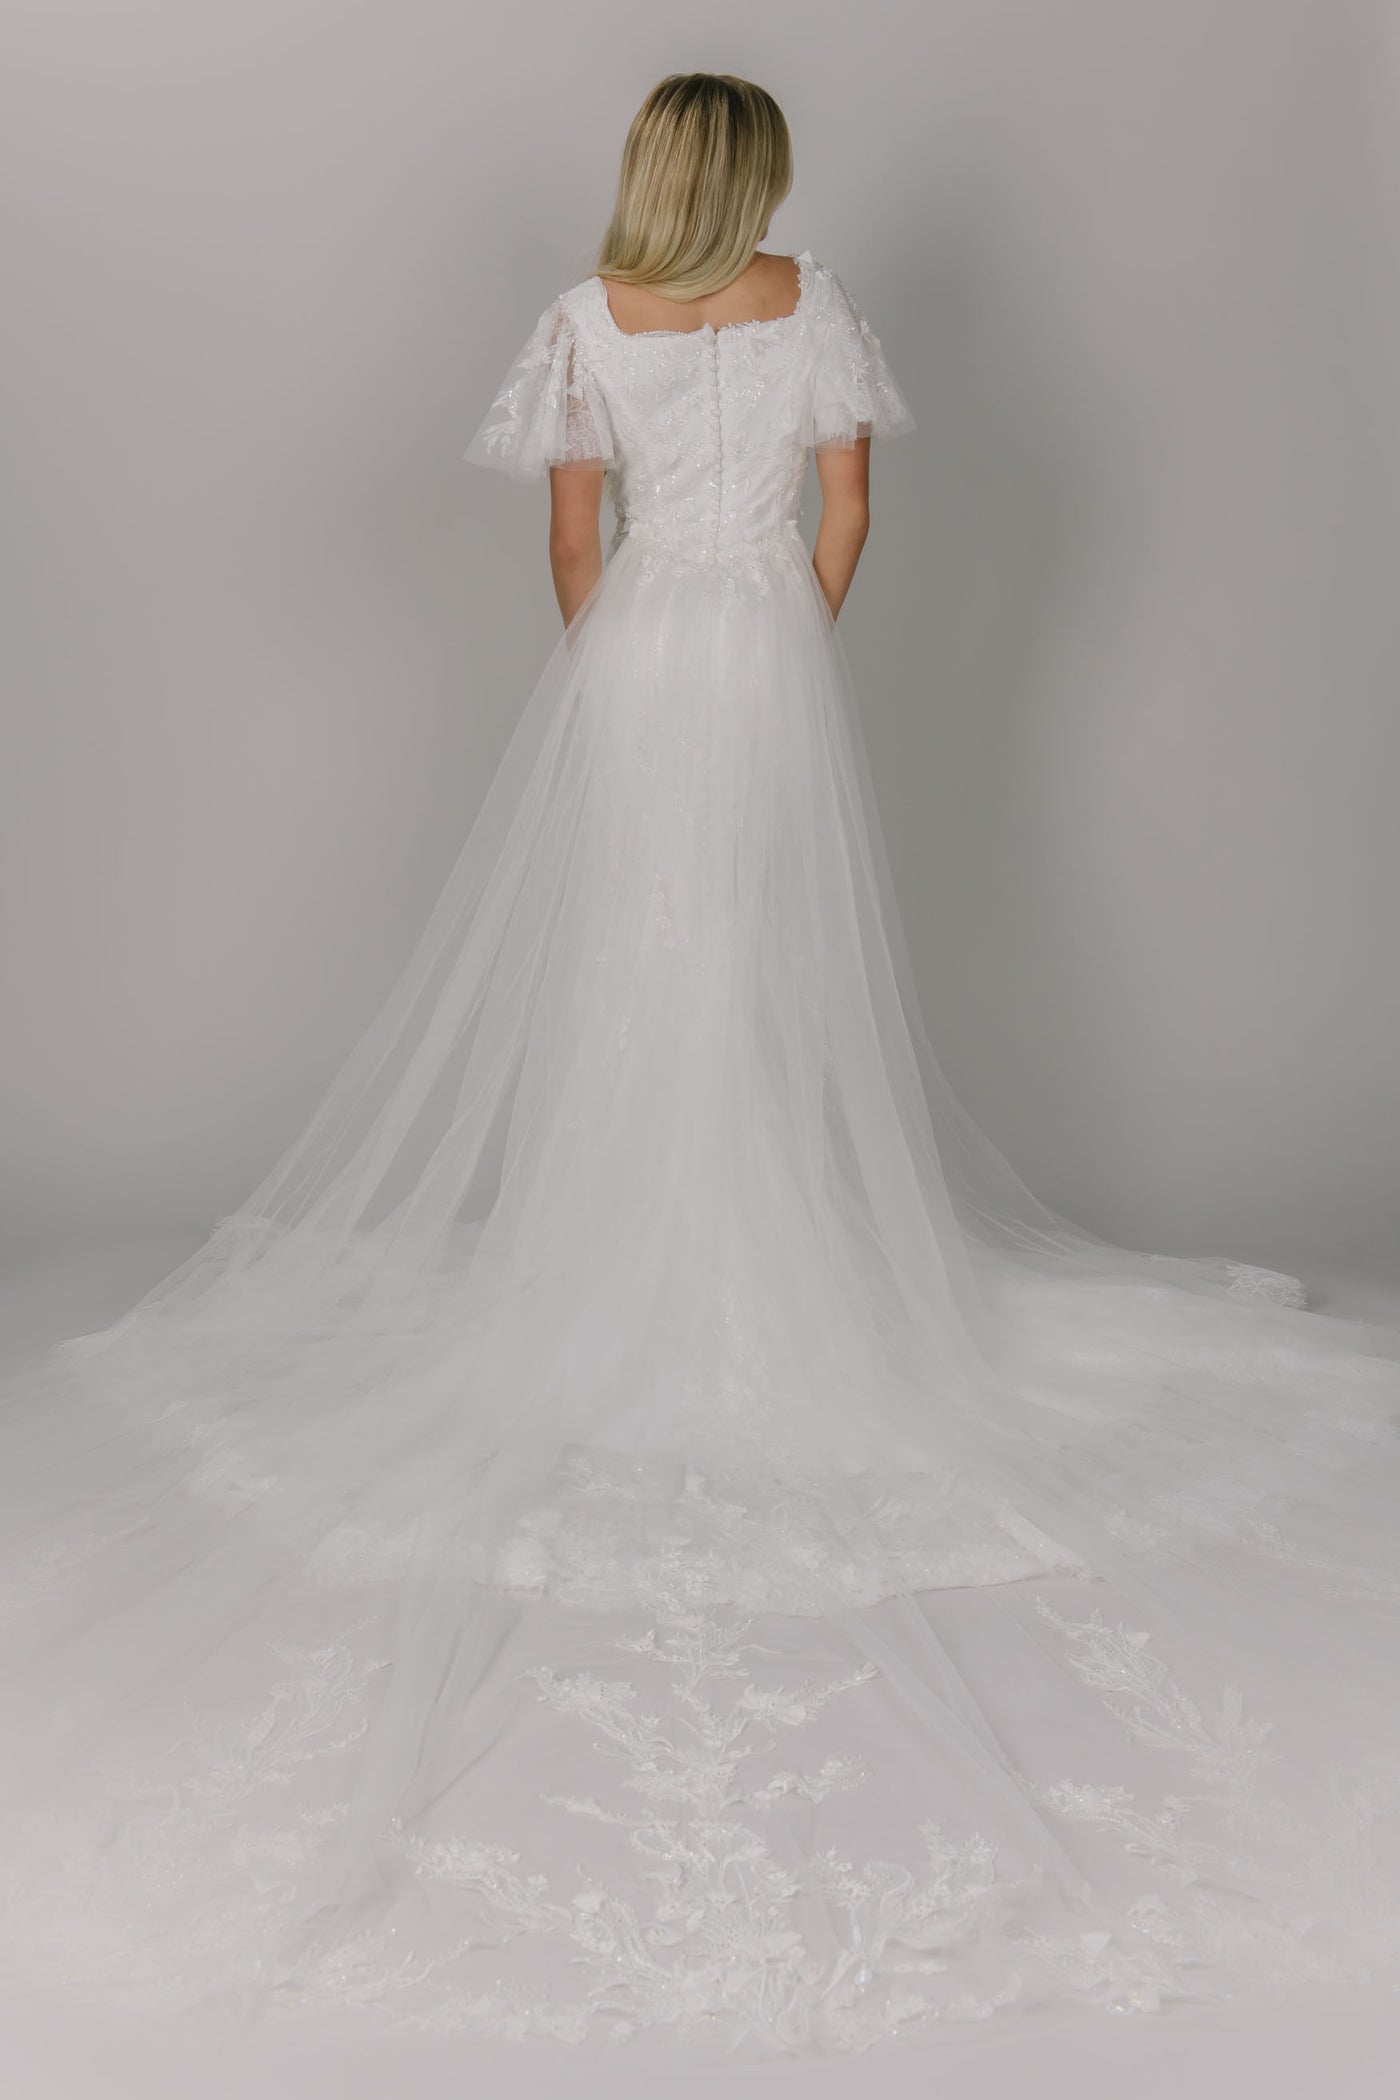 Sparkly modest wedding dress featuring a square neckline and flutter sleeves. It is a 3D lace and beaded fitted gown. It has a longer train. This view shows the overskirt that can be sold separately.